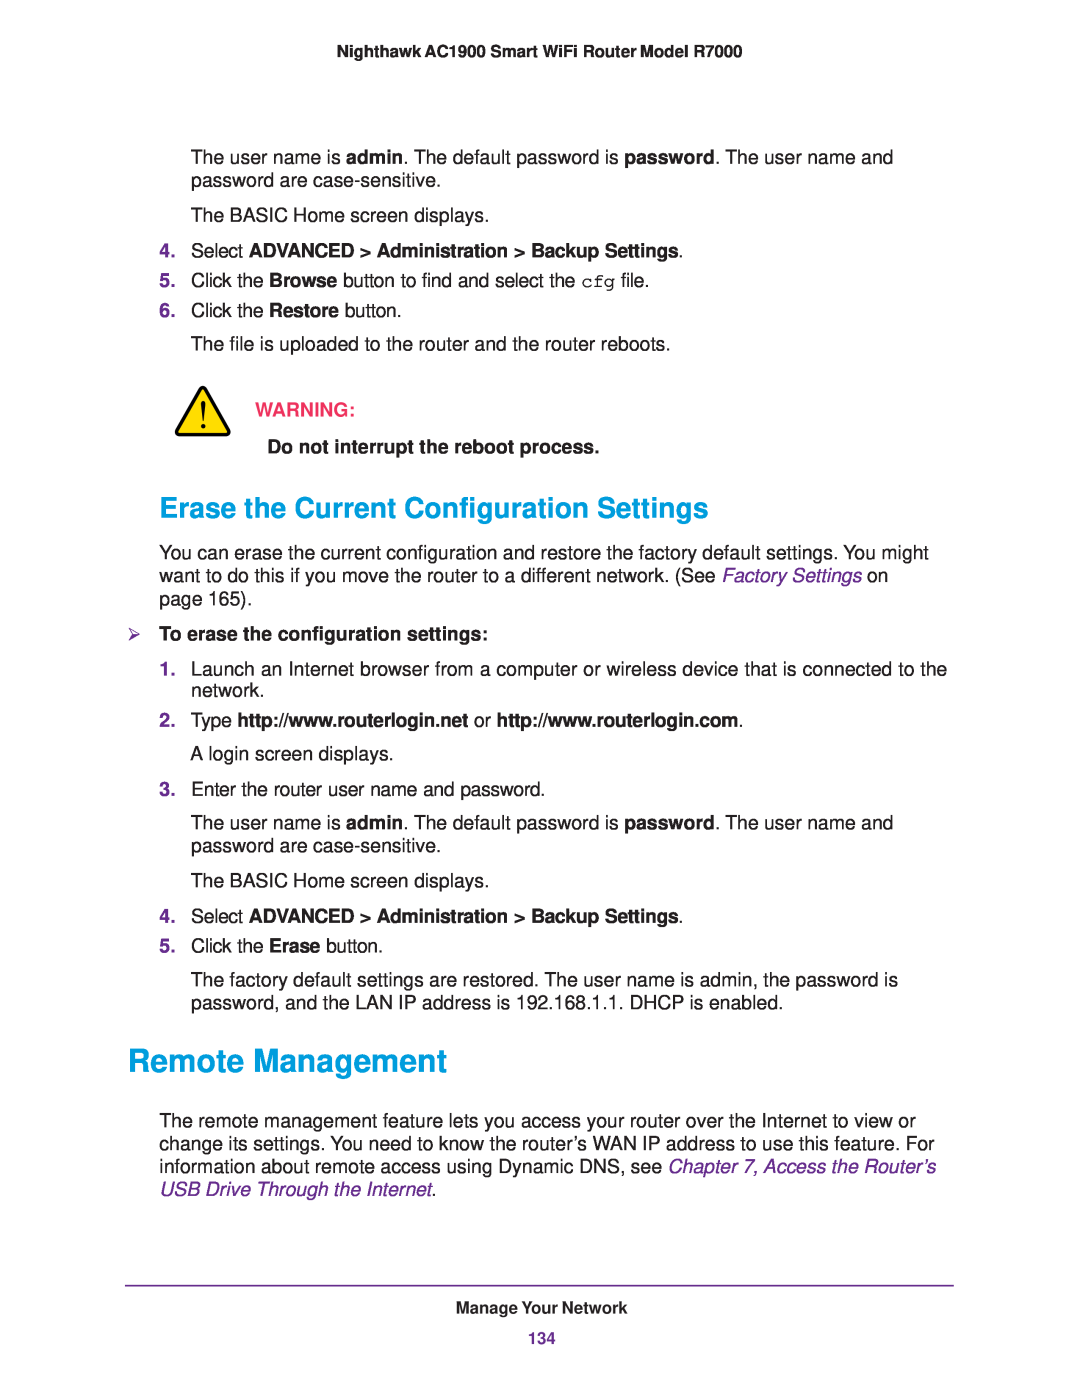 NETGEAR R7000 user manual Remote Management, Erase the Current Configuration Settings, Do not interrupt the reboot process 